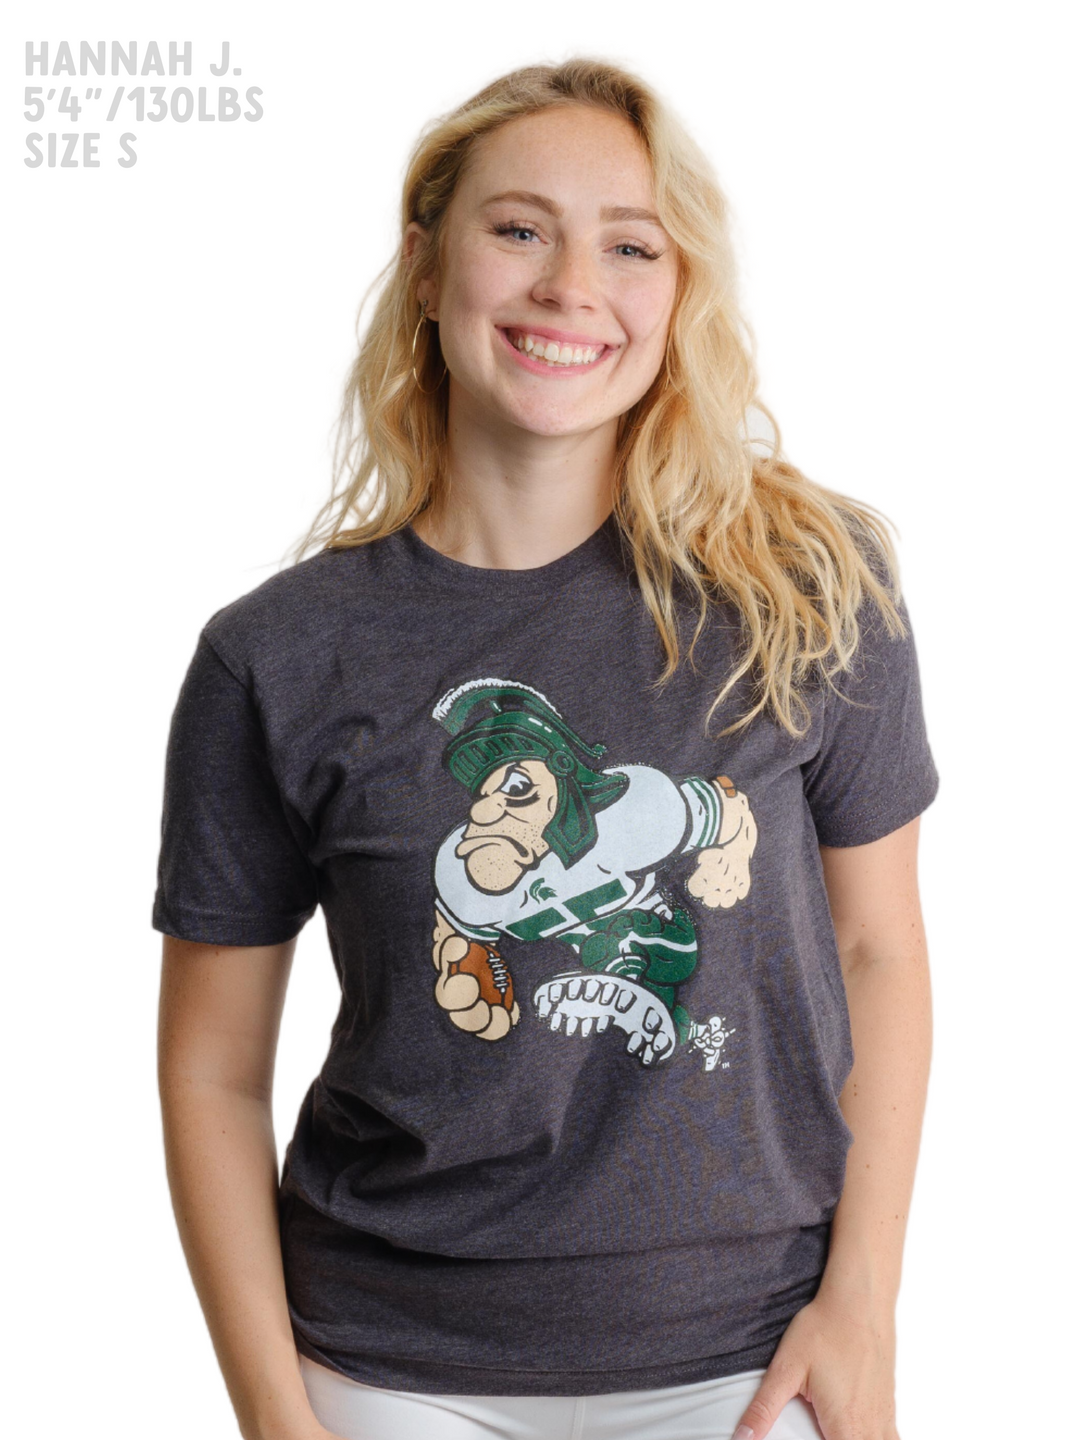 Vintage Michigan State Gruff Sparty T Shirt on female model